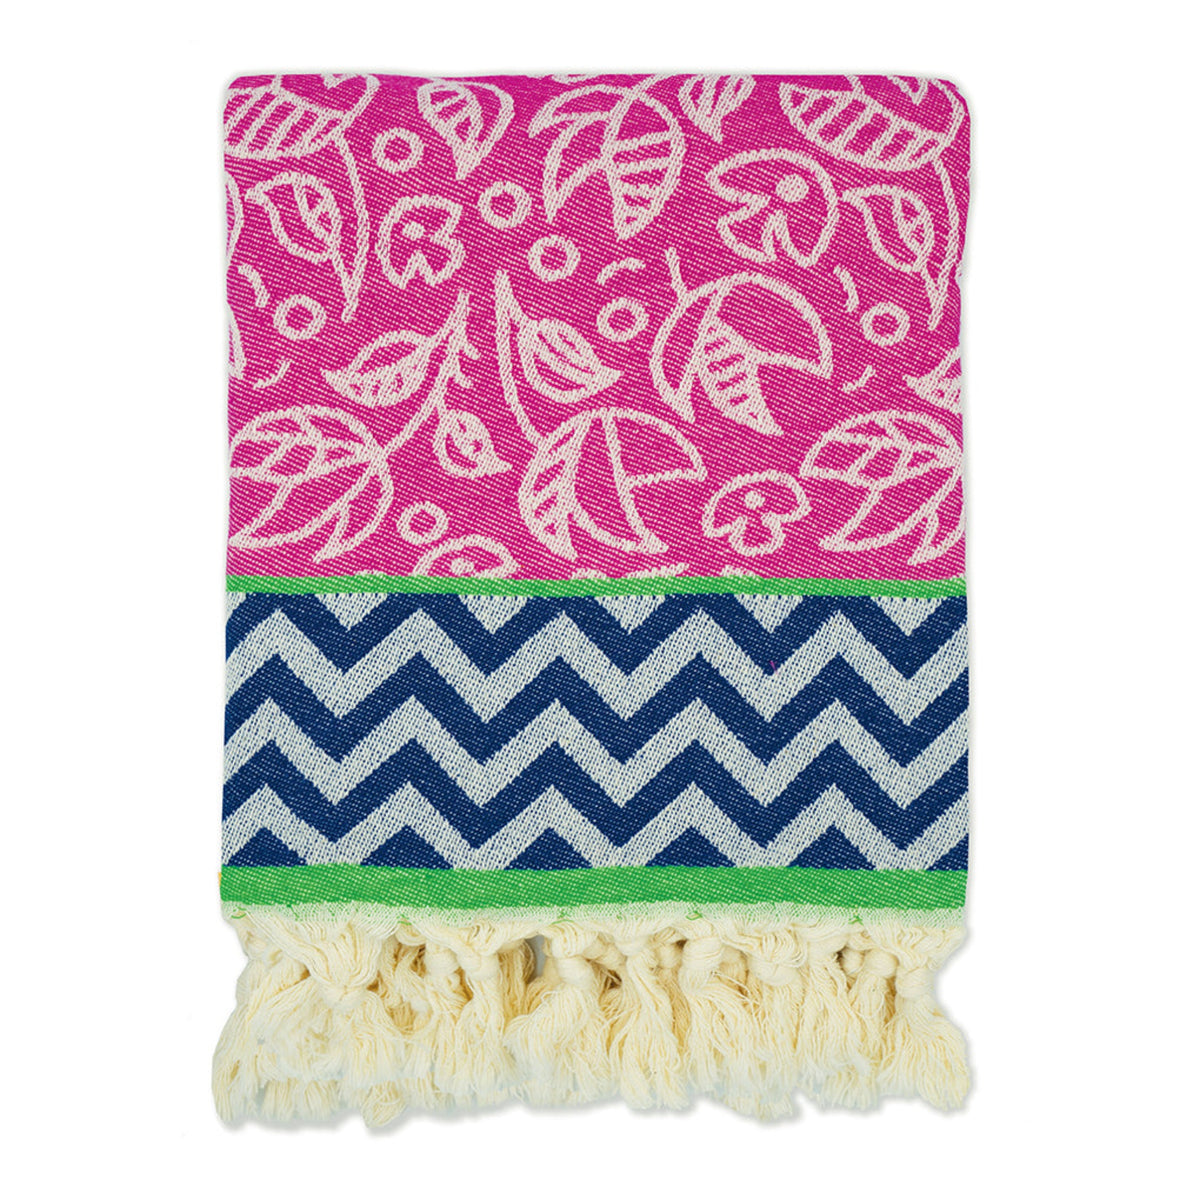 turkish towel fuchsia pink flower and navy blue zigzag pattern with tassels knots vibrant colours fun design designer fashinable